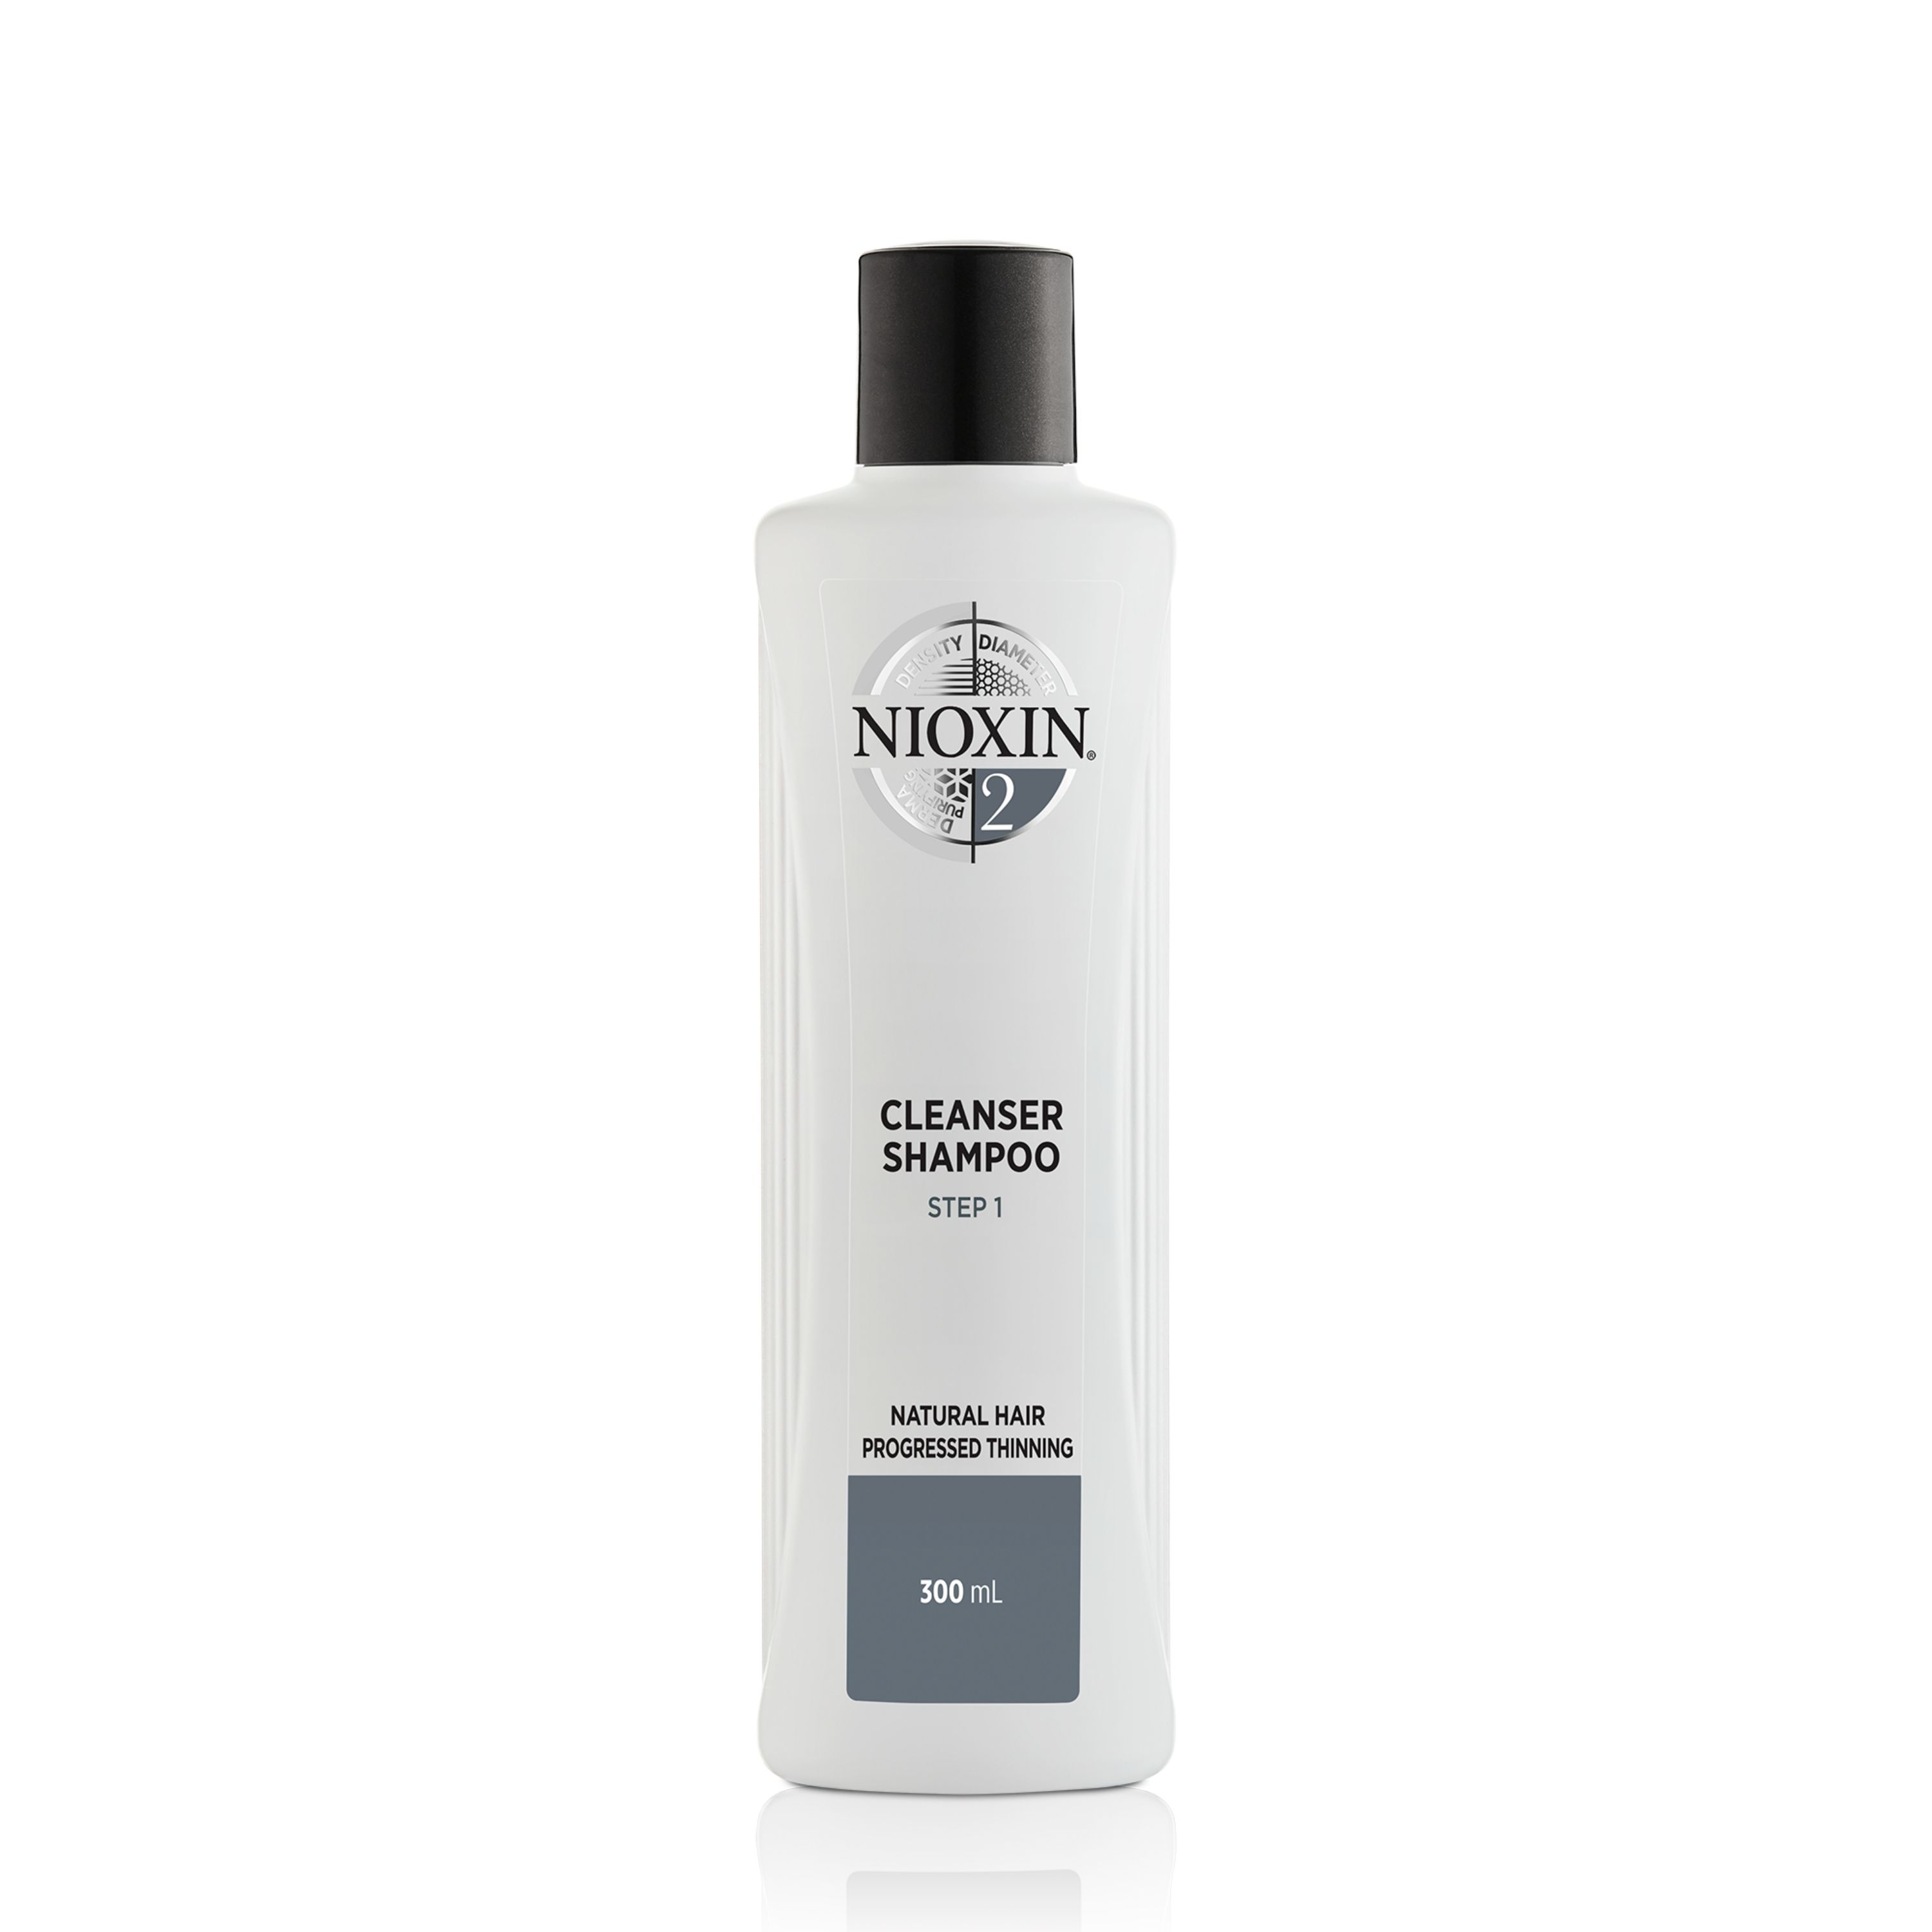 Image of Nioxin System 2 Cleanser Shampoo 300ml